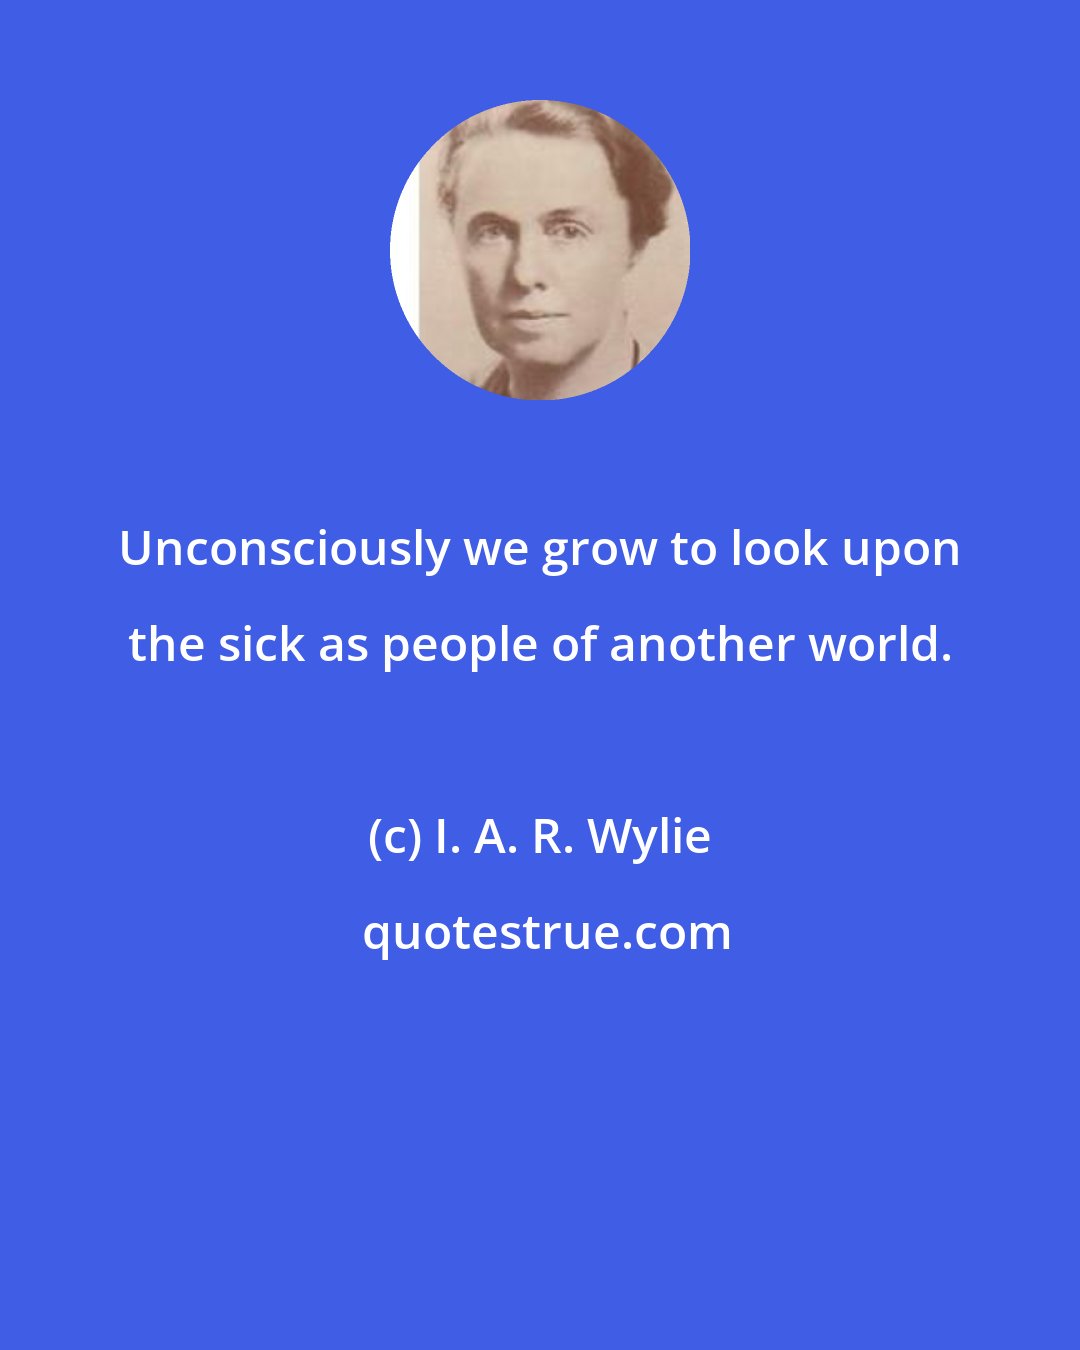 I. A. R. Wylie: Unconsciously we grow to look upon the sick as people of another world.